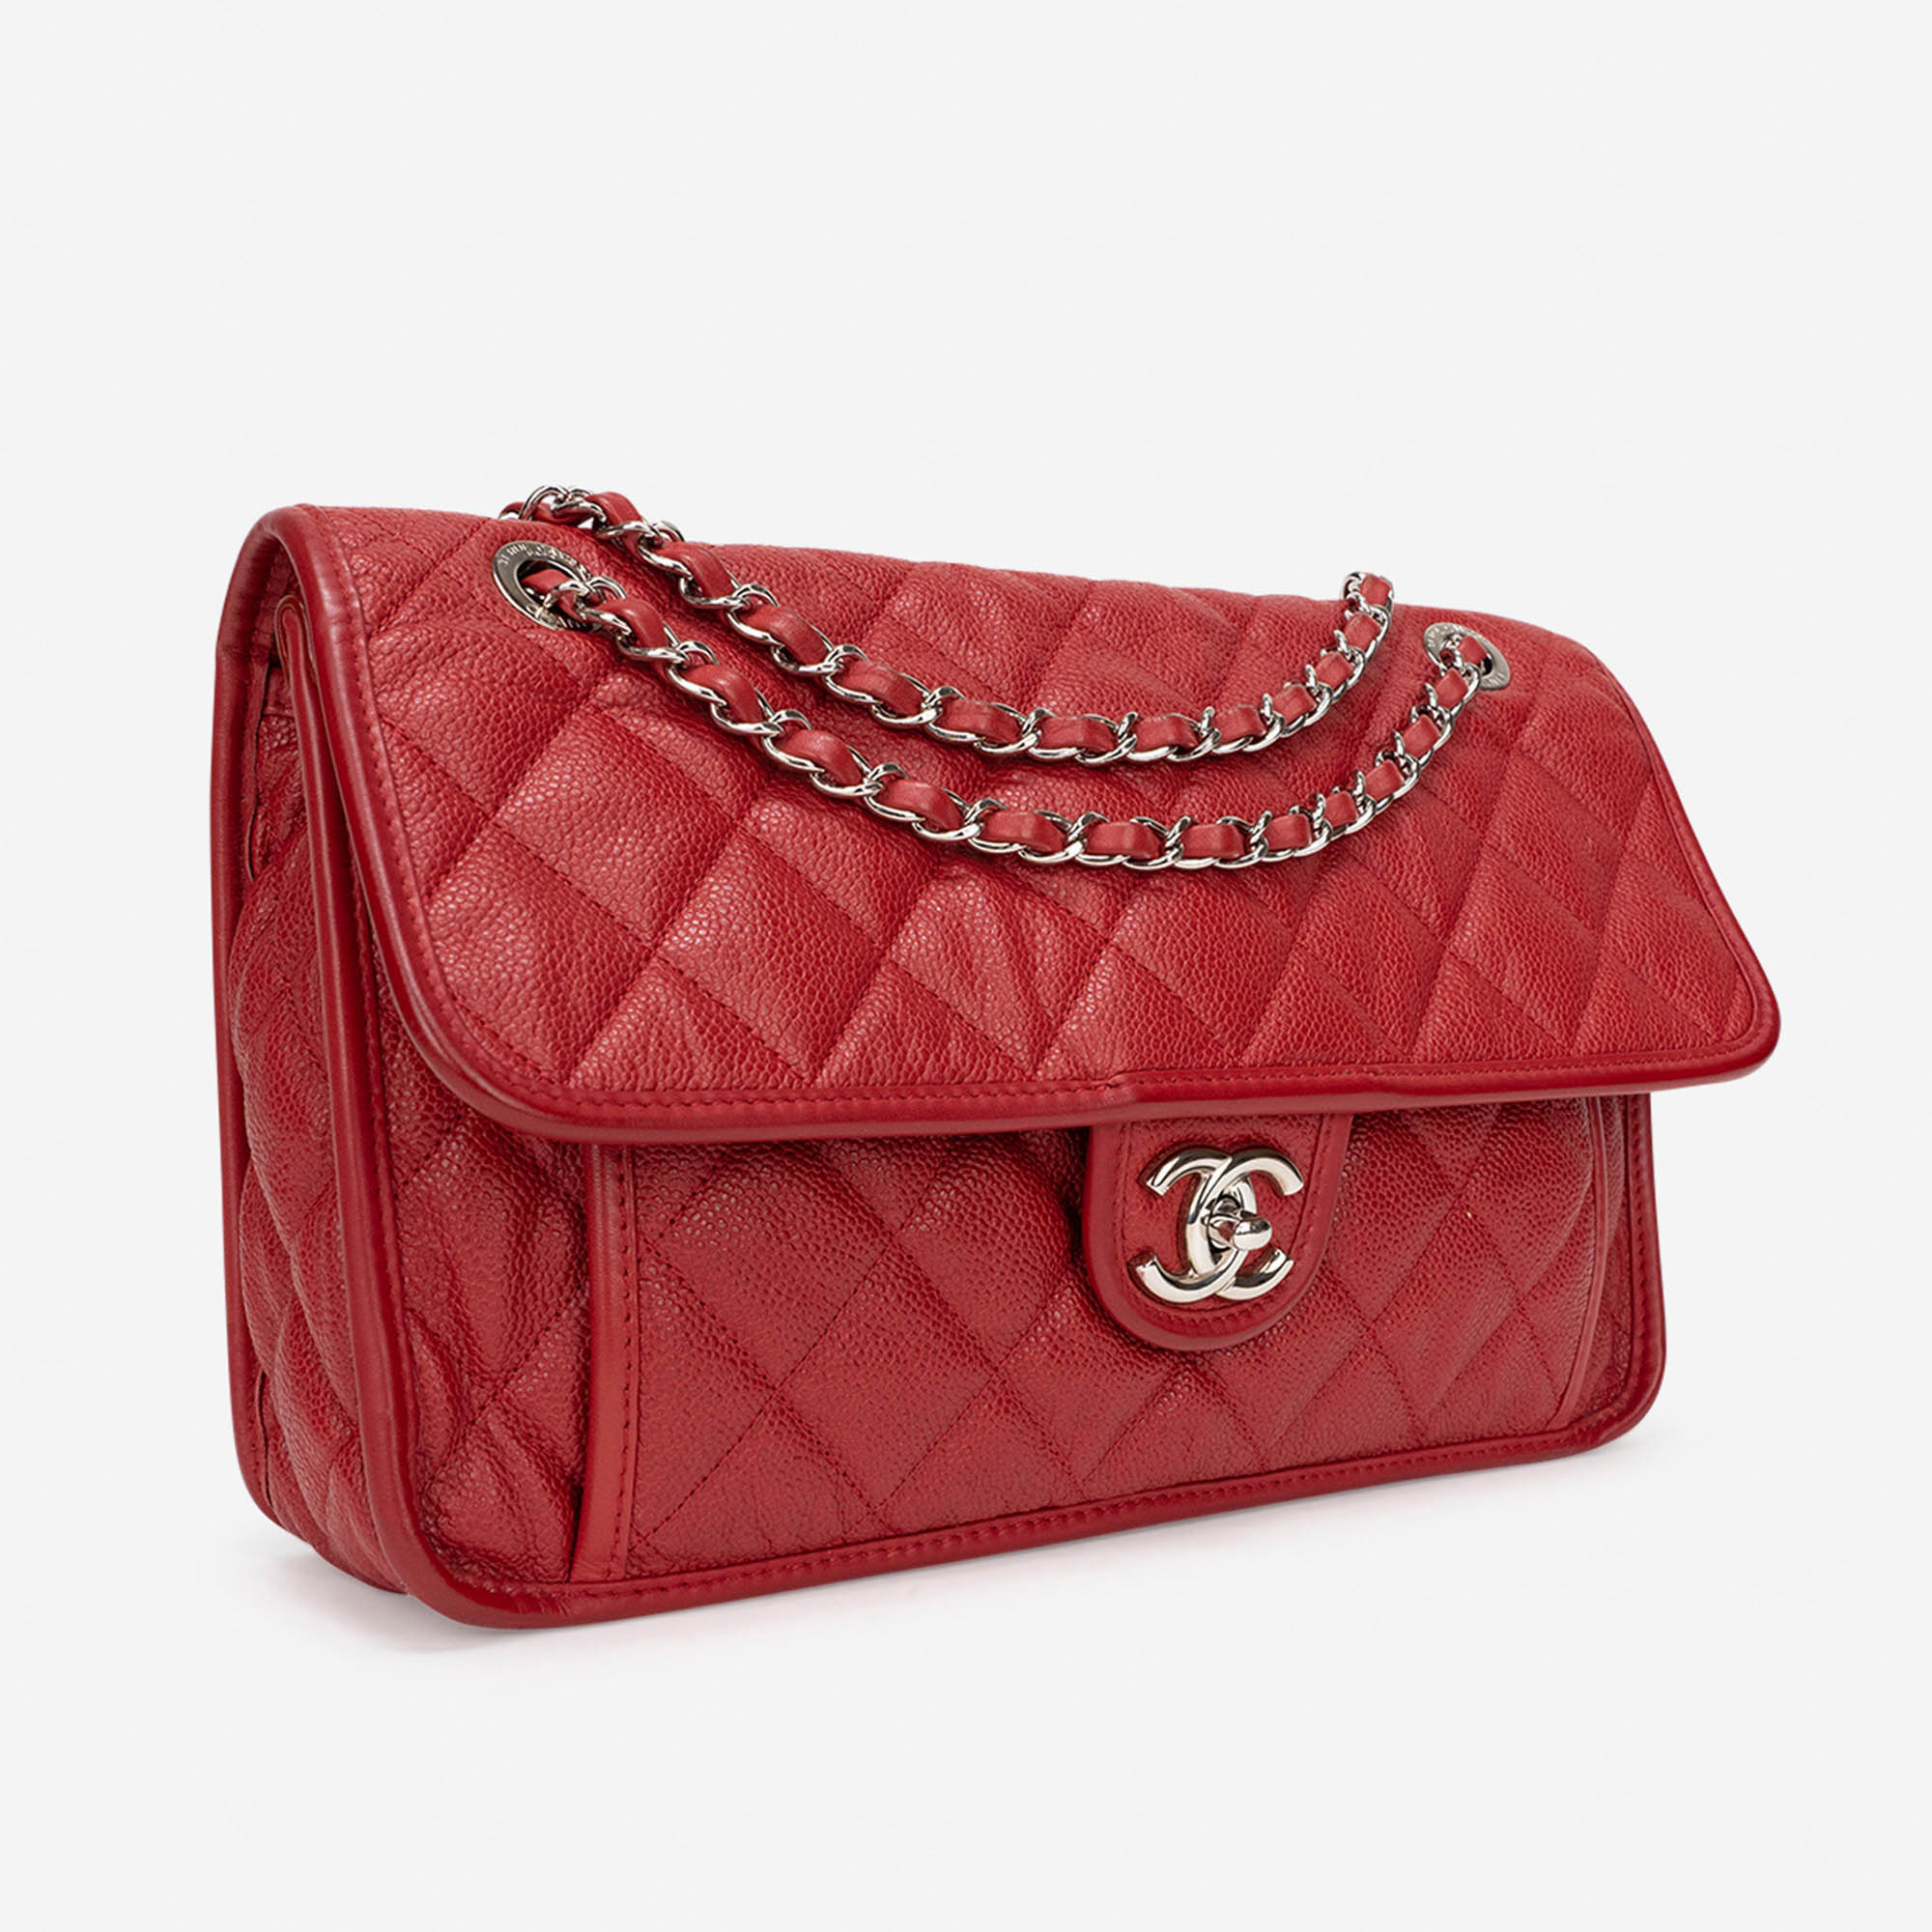 Chanel Timeless French Riviera Jumbo Caviar Red